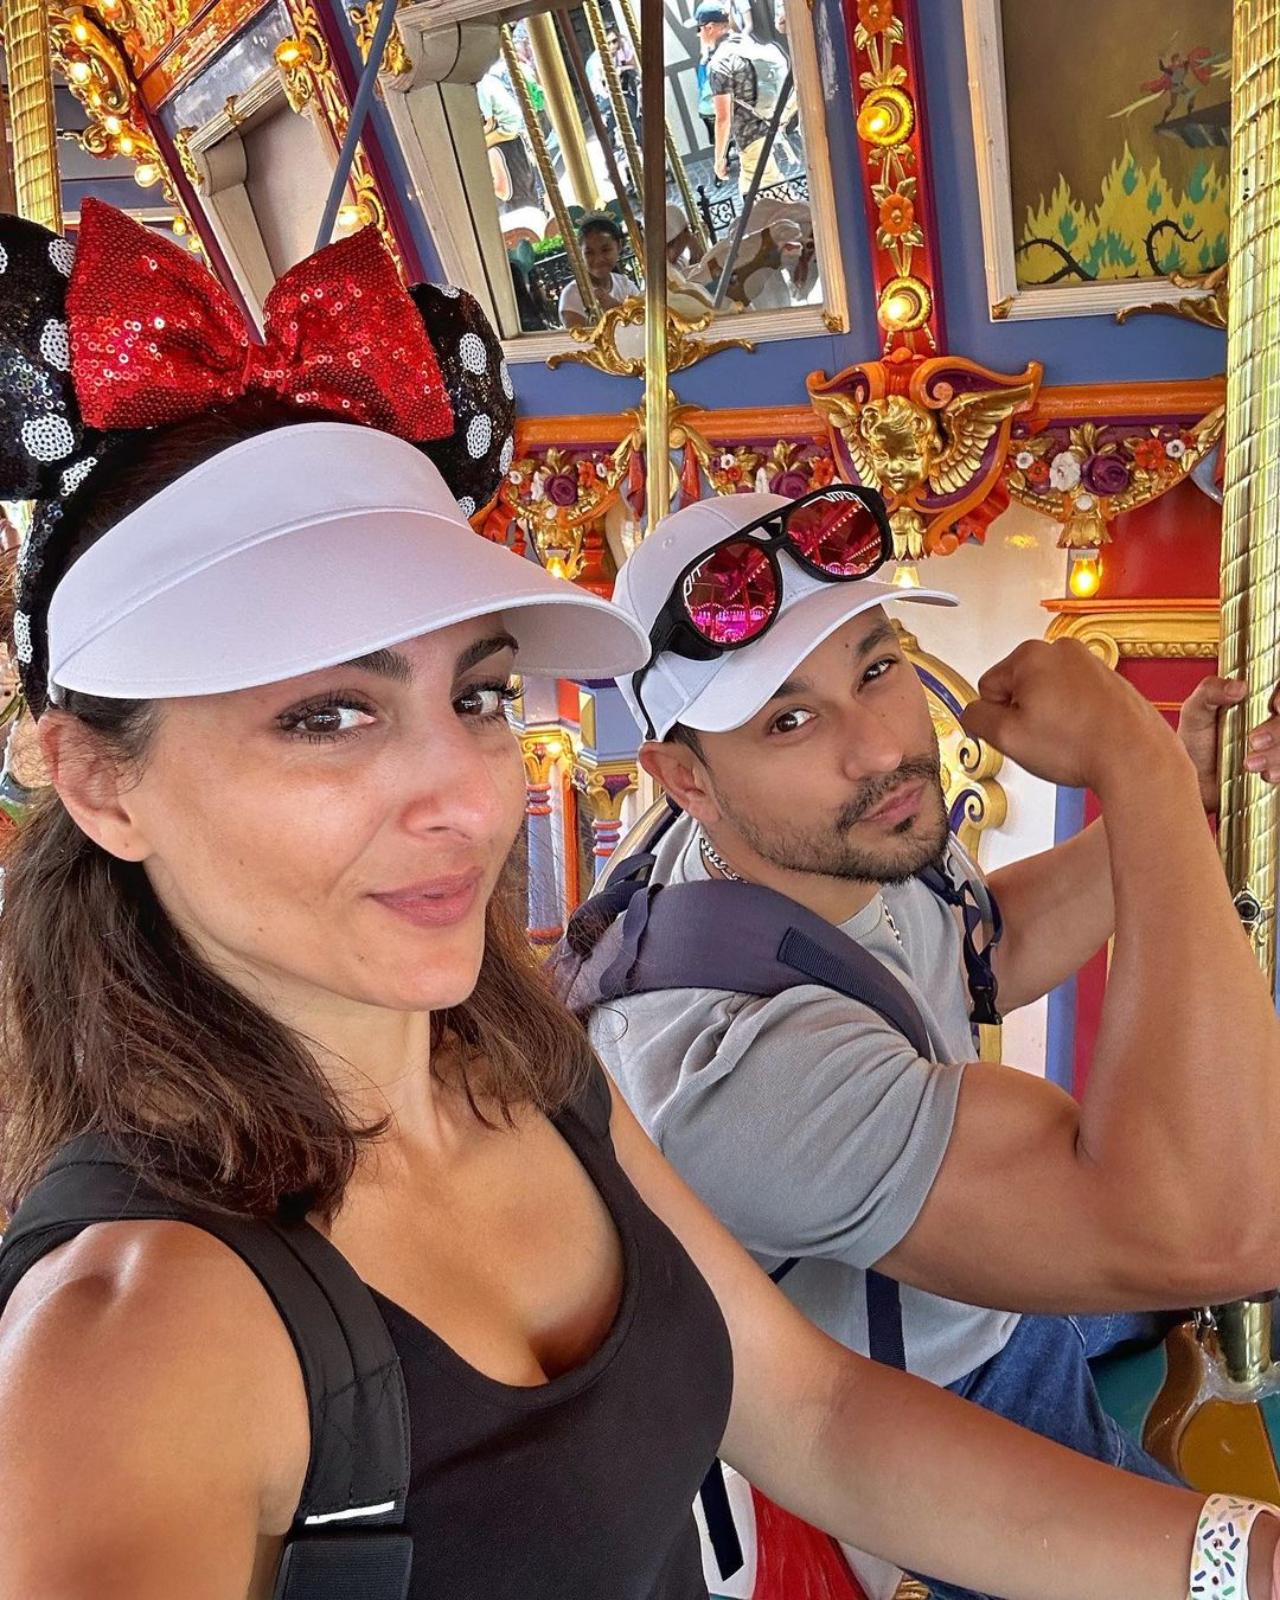 No way is Soha going to let her husband enjoy the merriment alone! The couple seem to be one step ahead of their daughter in enjoying their rides. The actress even has a Minnie Mouse hairband!